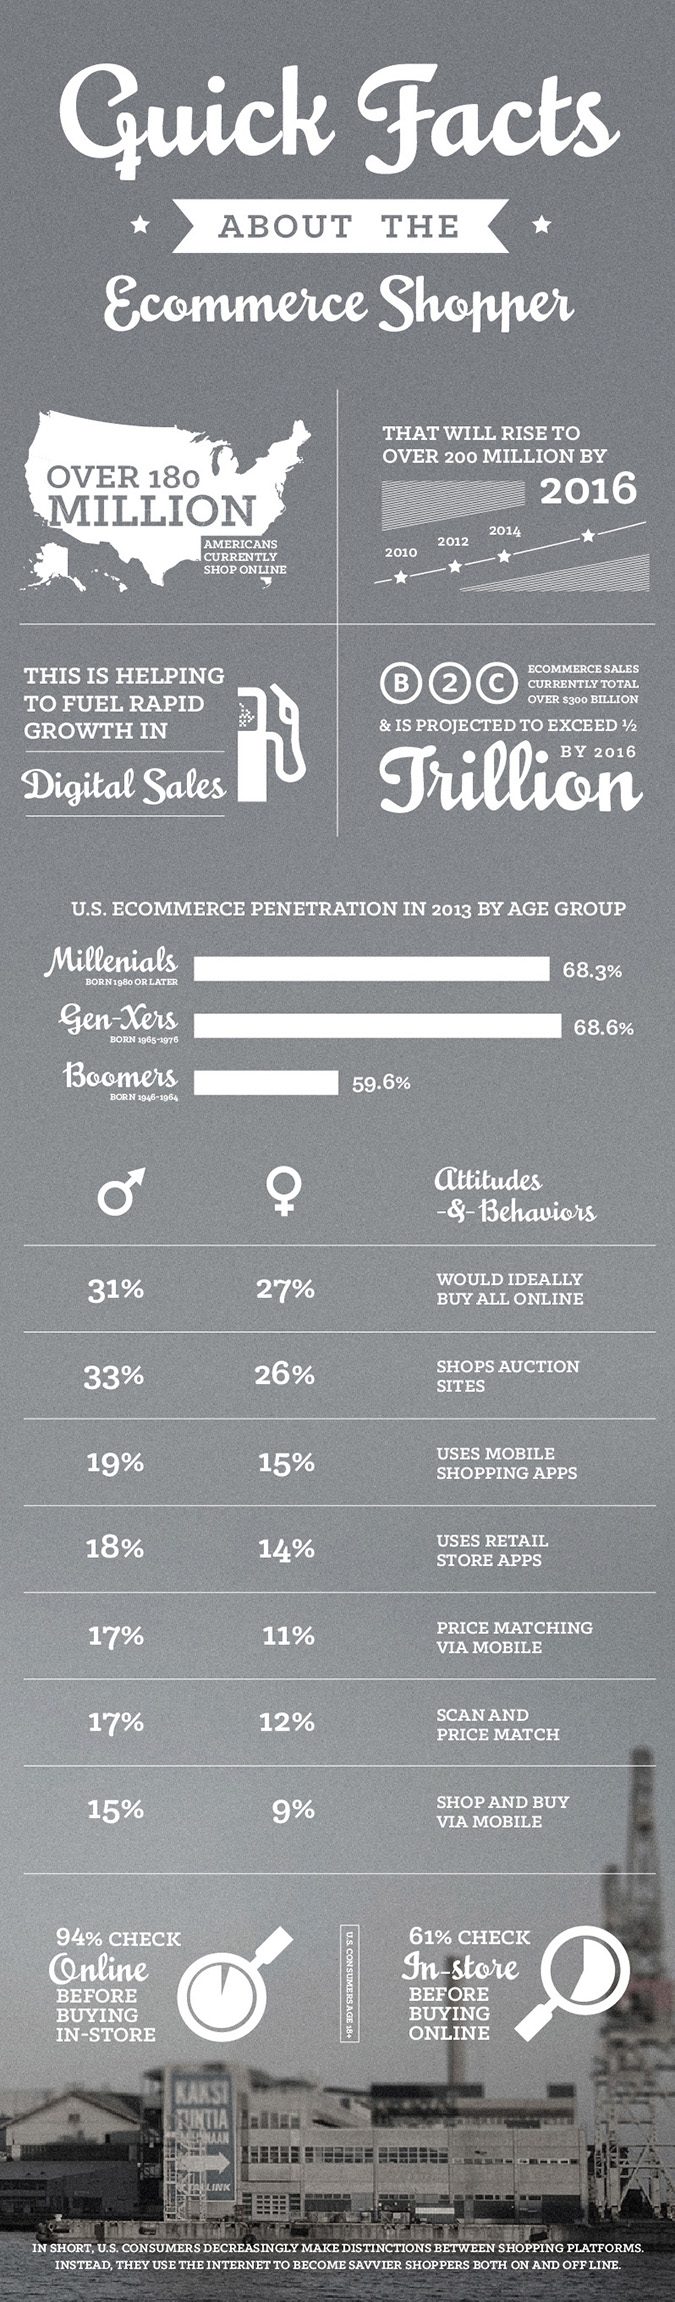 Quick facts about the ecommerce shopper